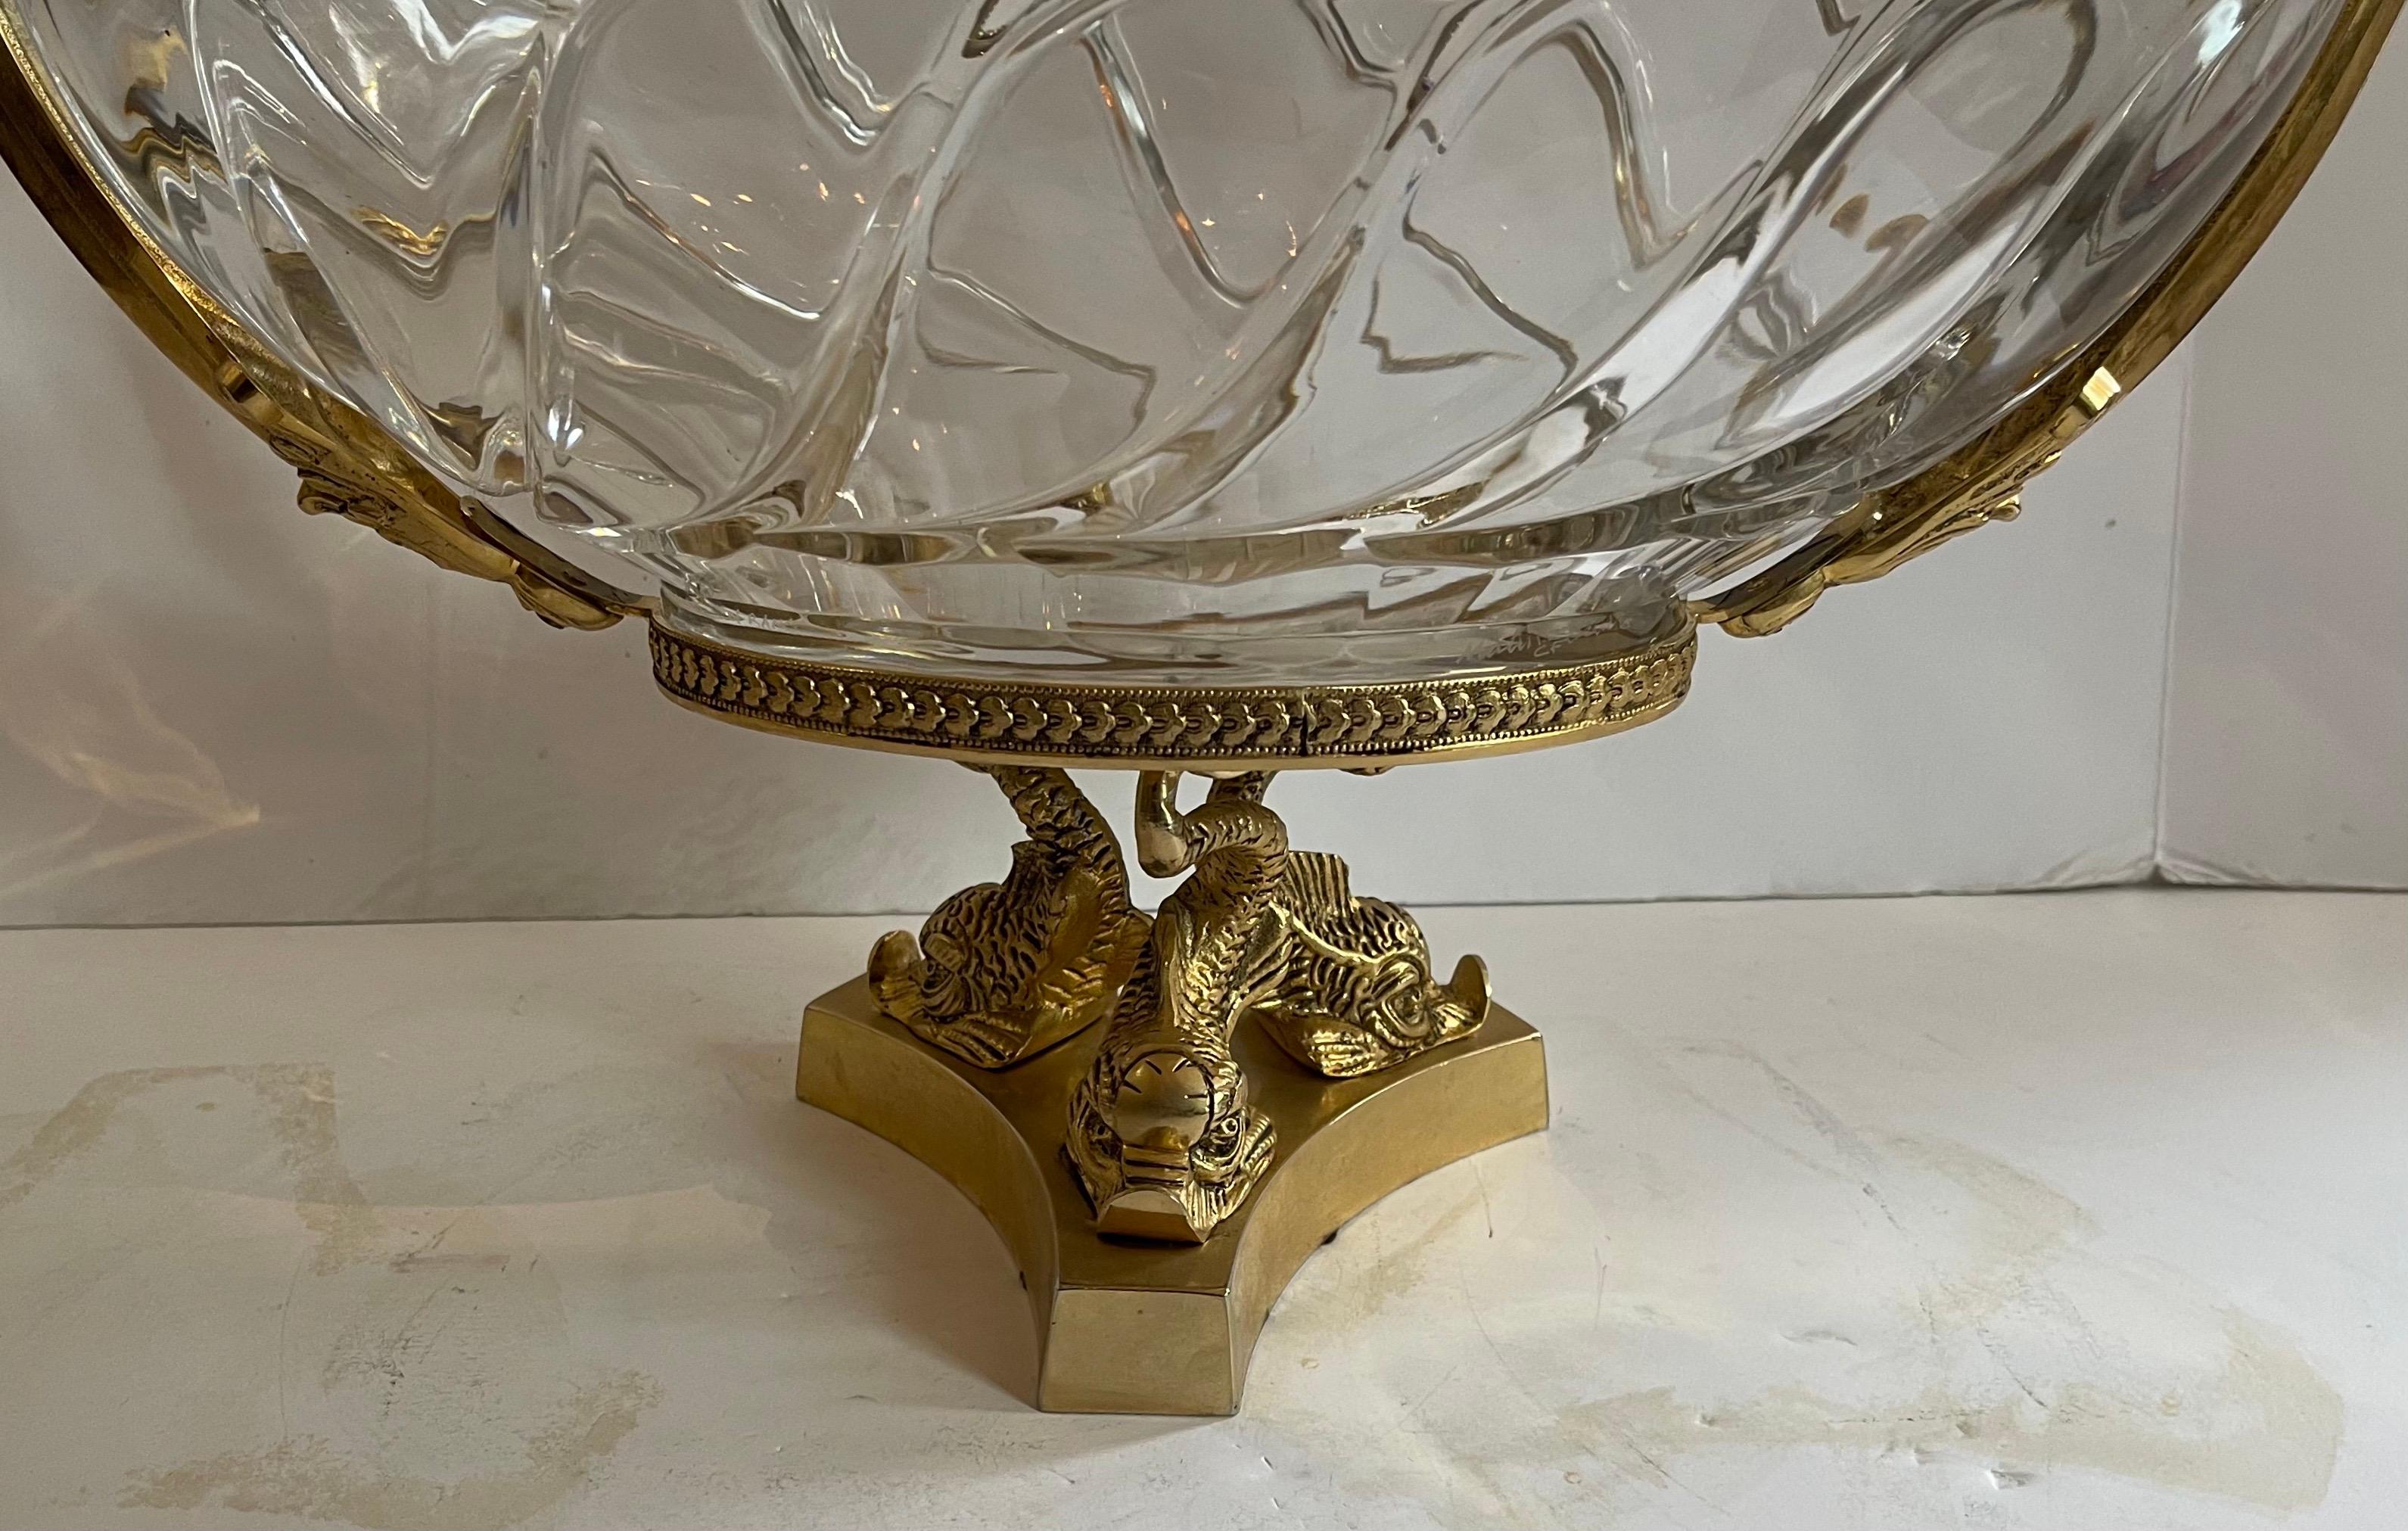 A wonderful large French doré bronze centerpiece with three dolphins on the pedestal supporting an oval crystal bowl with two lovely swans in flight on each side. The faceted fine cut crystal insert with star burst bottom add to the elegance of this